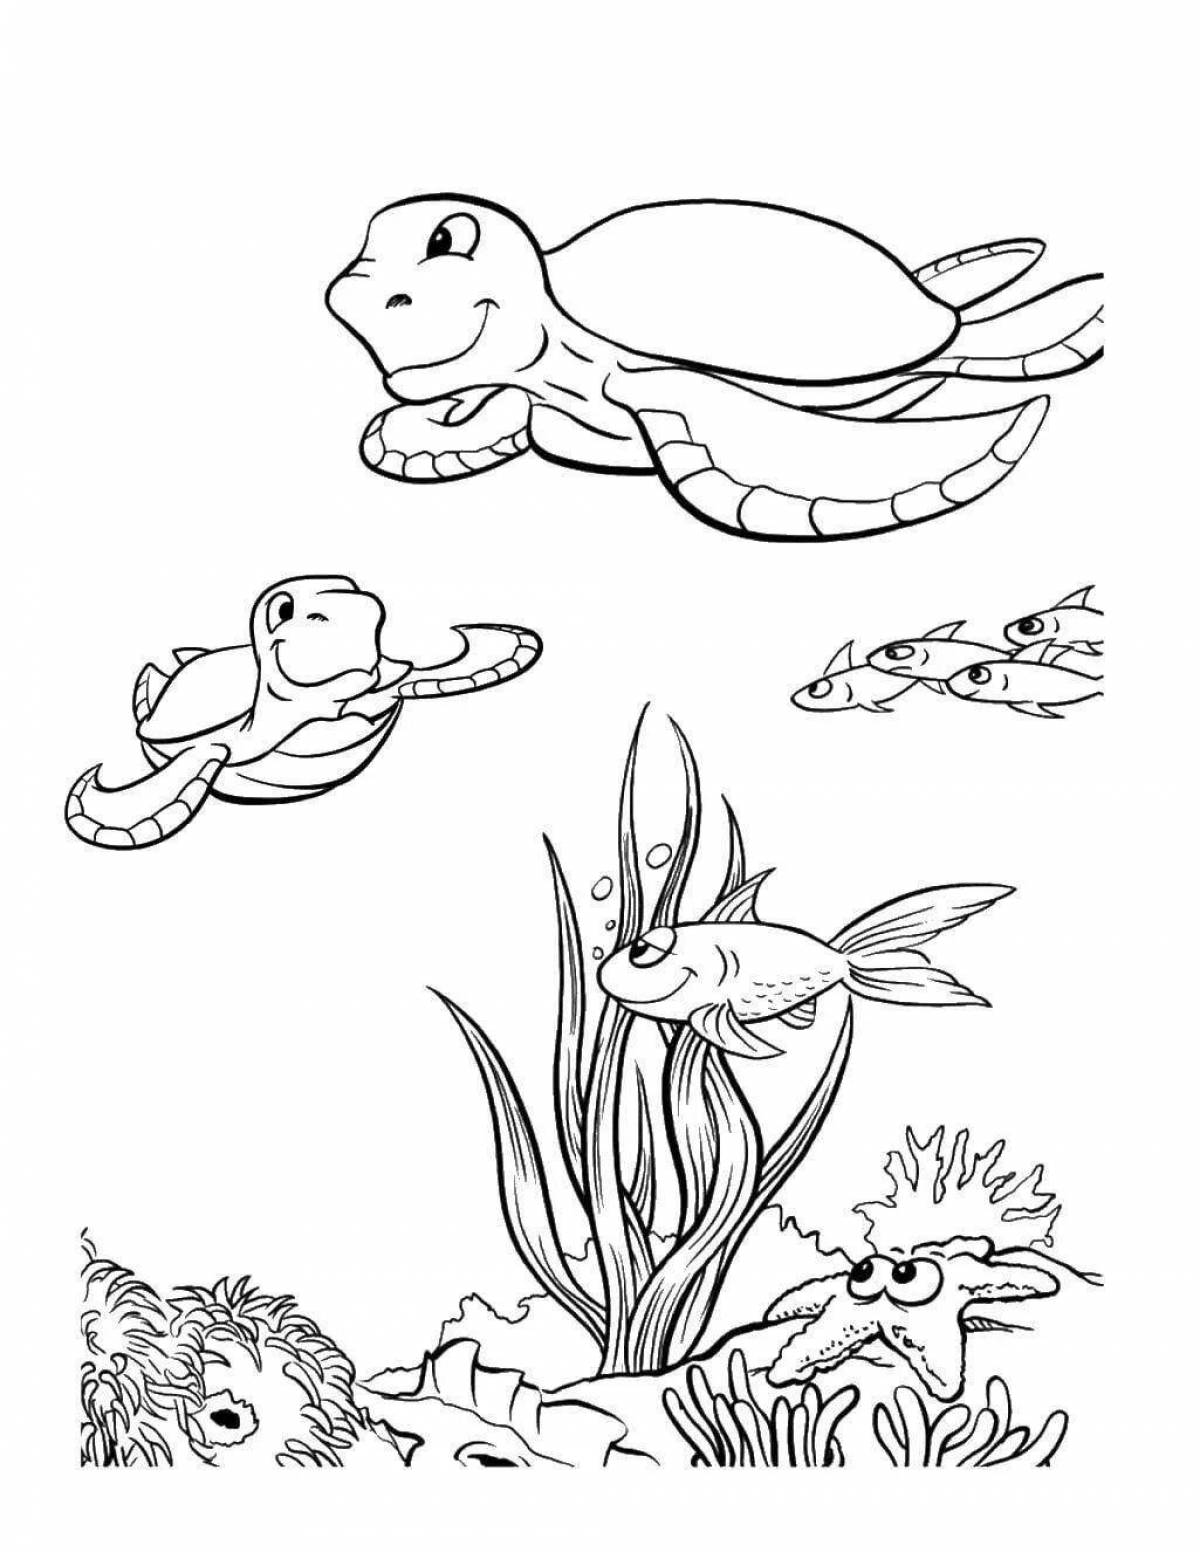 Animated aquatic life coloring page